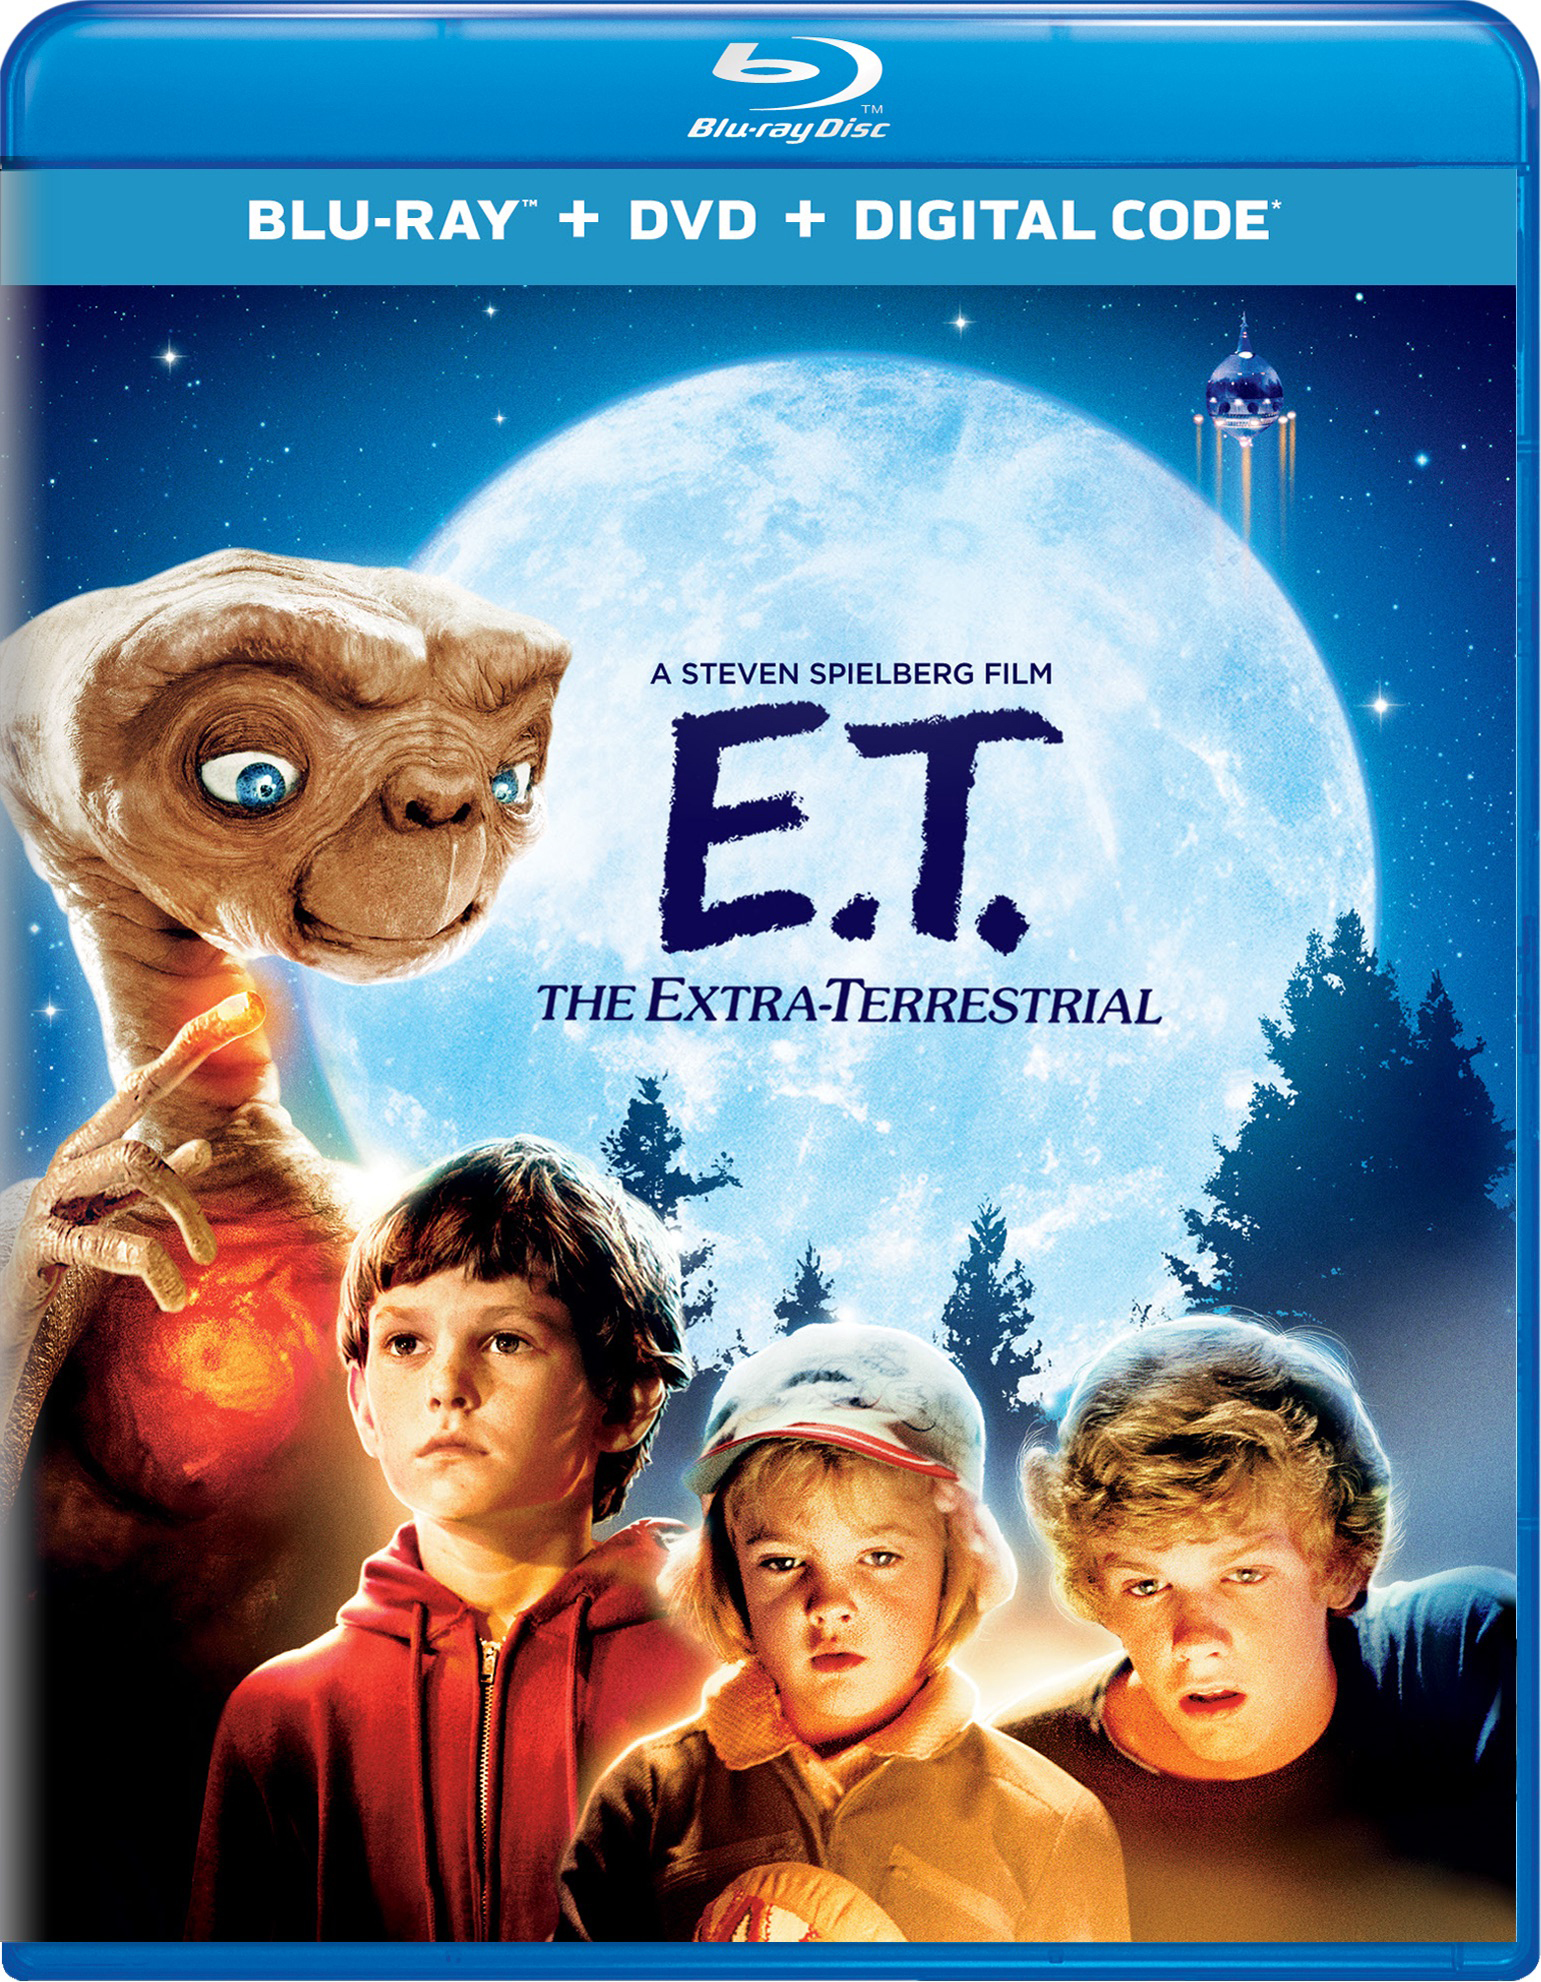 E.T. The Extra Terrestrial (DVD + Digital) - Blu-ray [ 1982 ]  - Sci Fi Movies On Blu-ray - Movies On GRUV